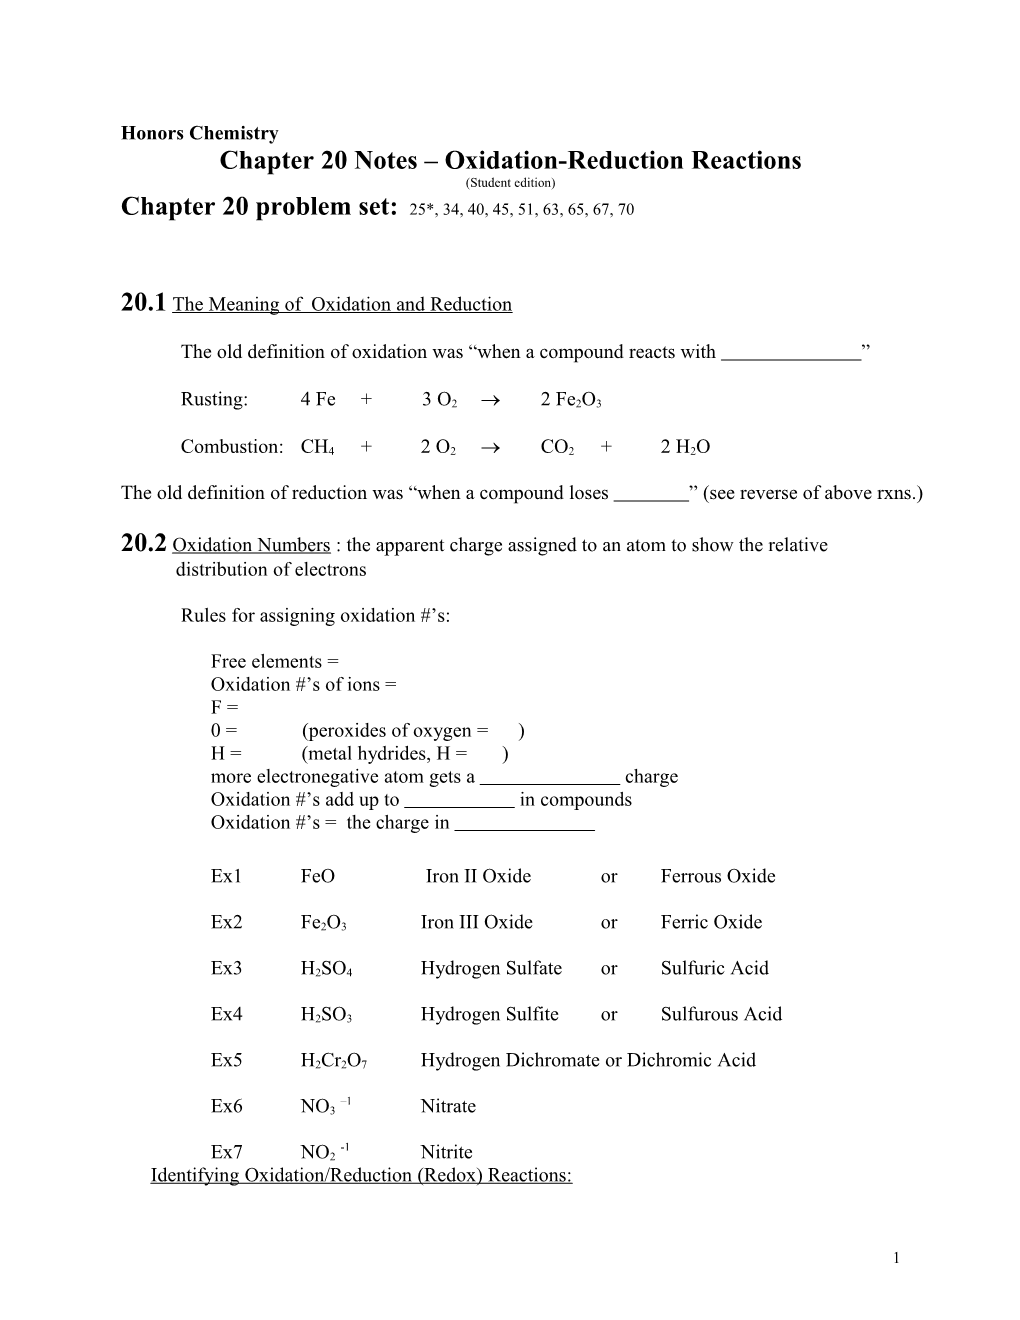 Chapter 20 Notes Oxidation-Reduction Reactions